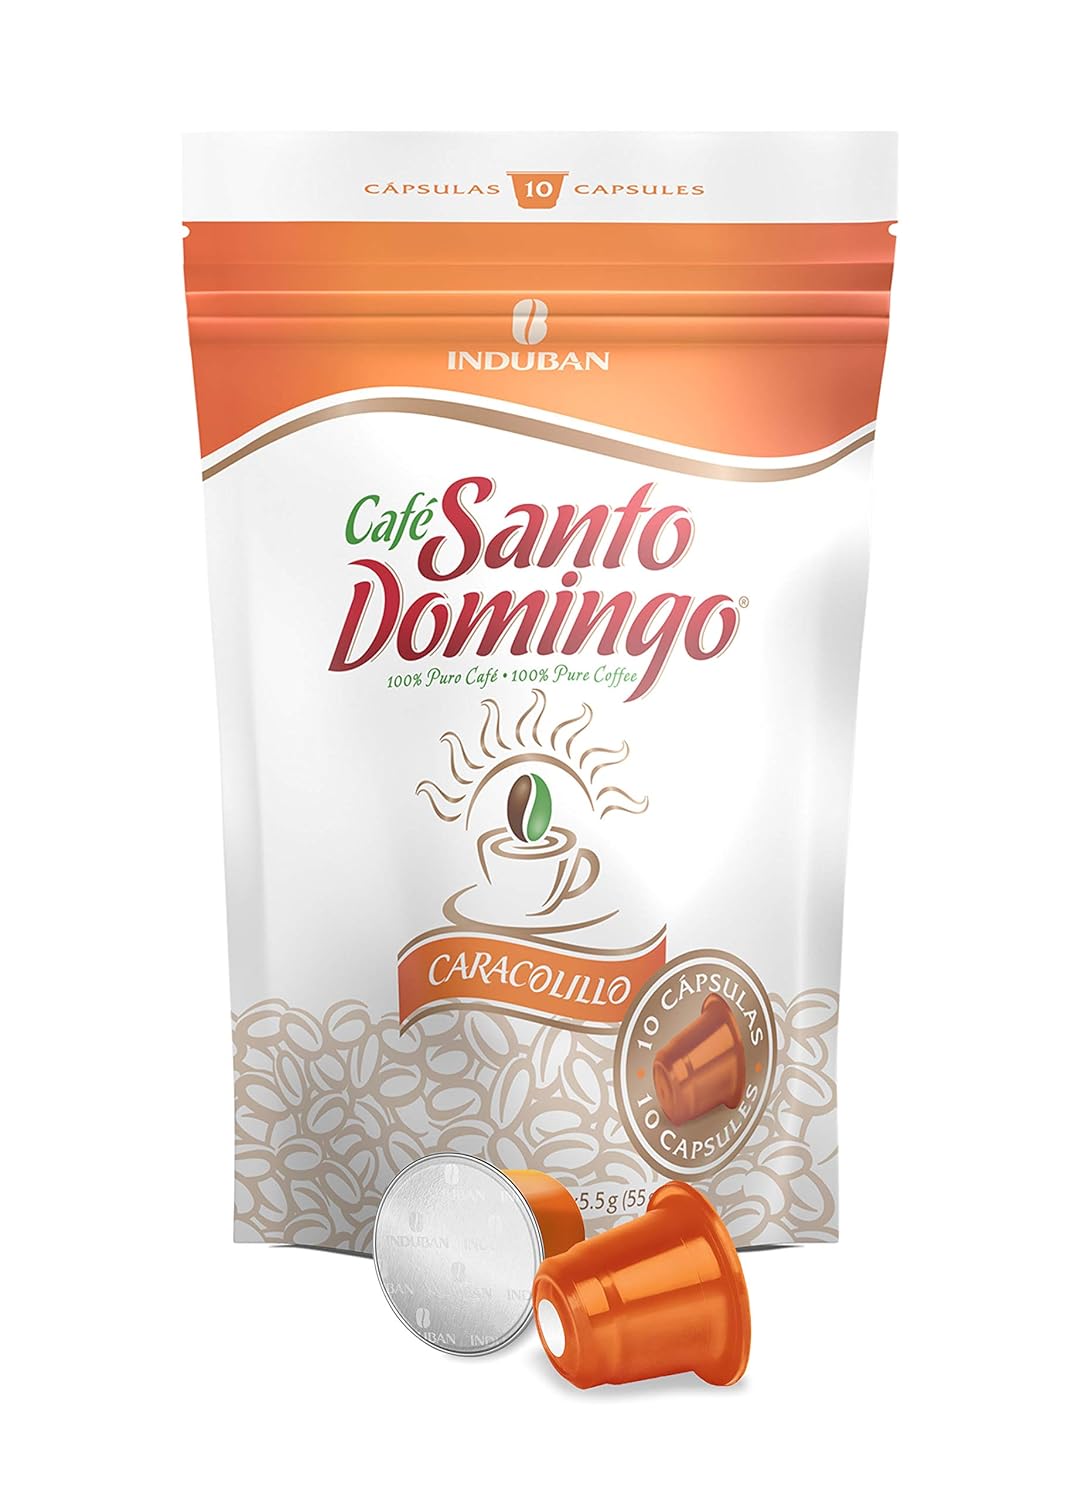 Santo Domingo Coffee Peaberry Capsules - Compatible with Nespresso Original Brewers - Product from the Dominican Republic (10 Count)